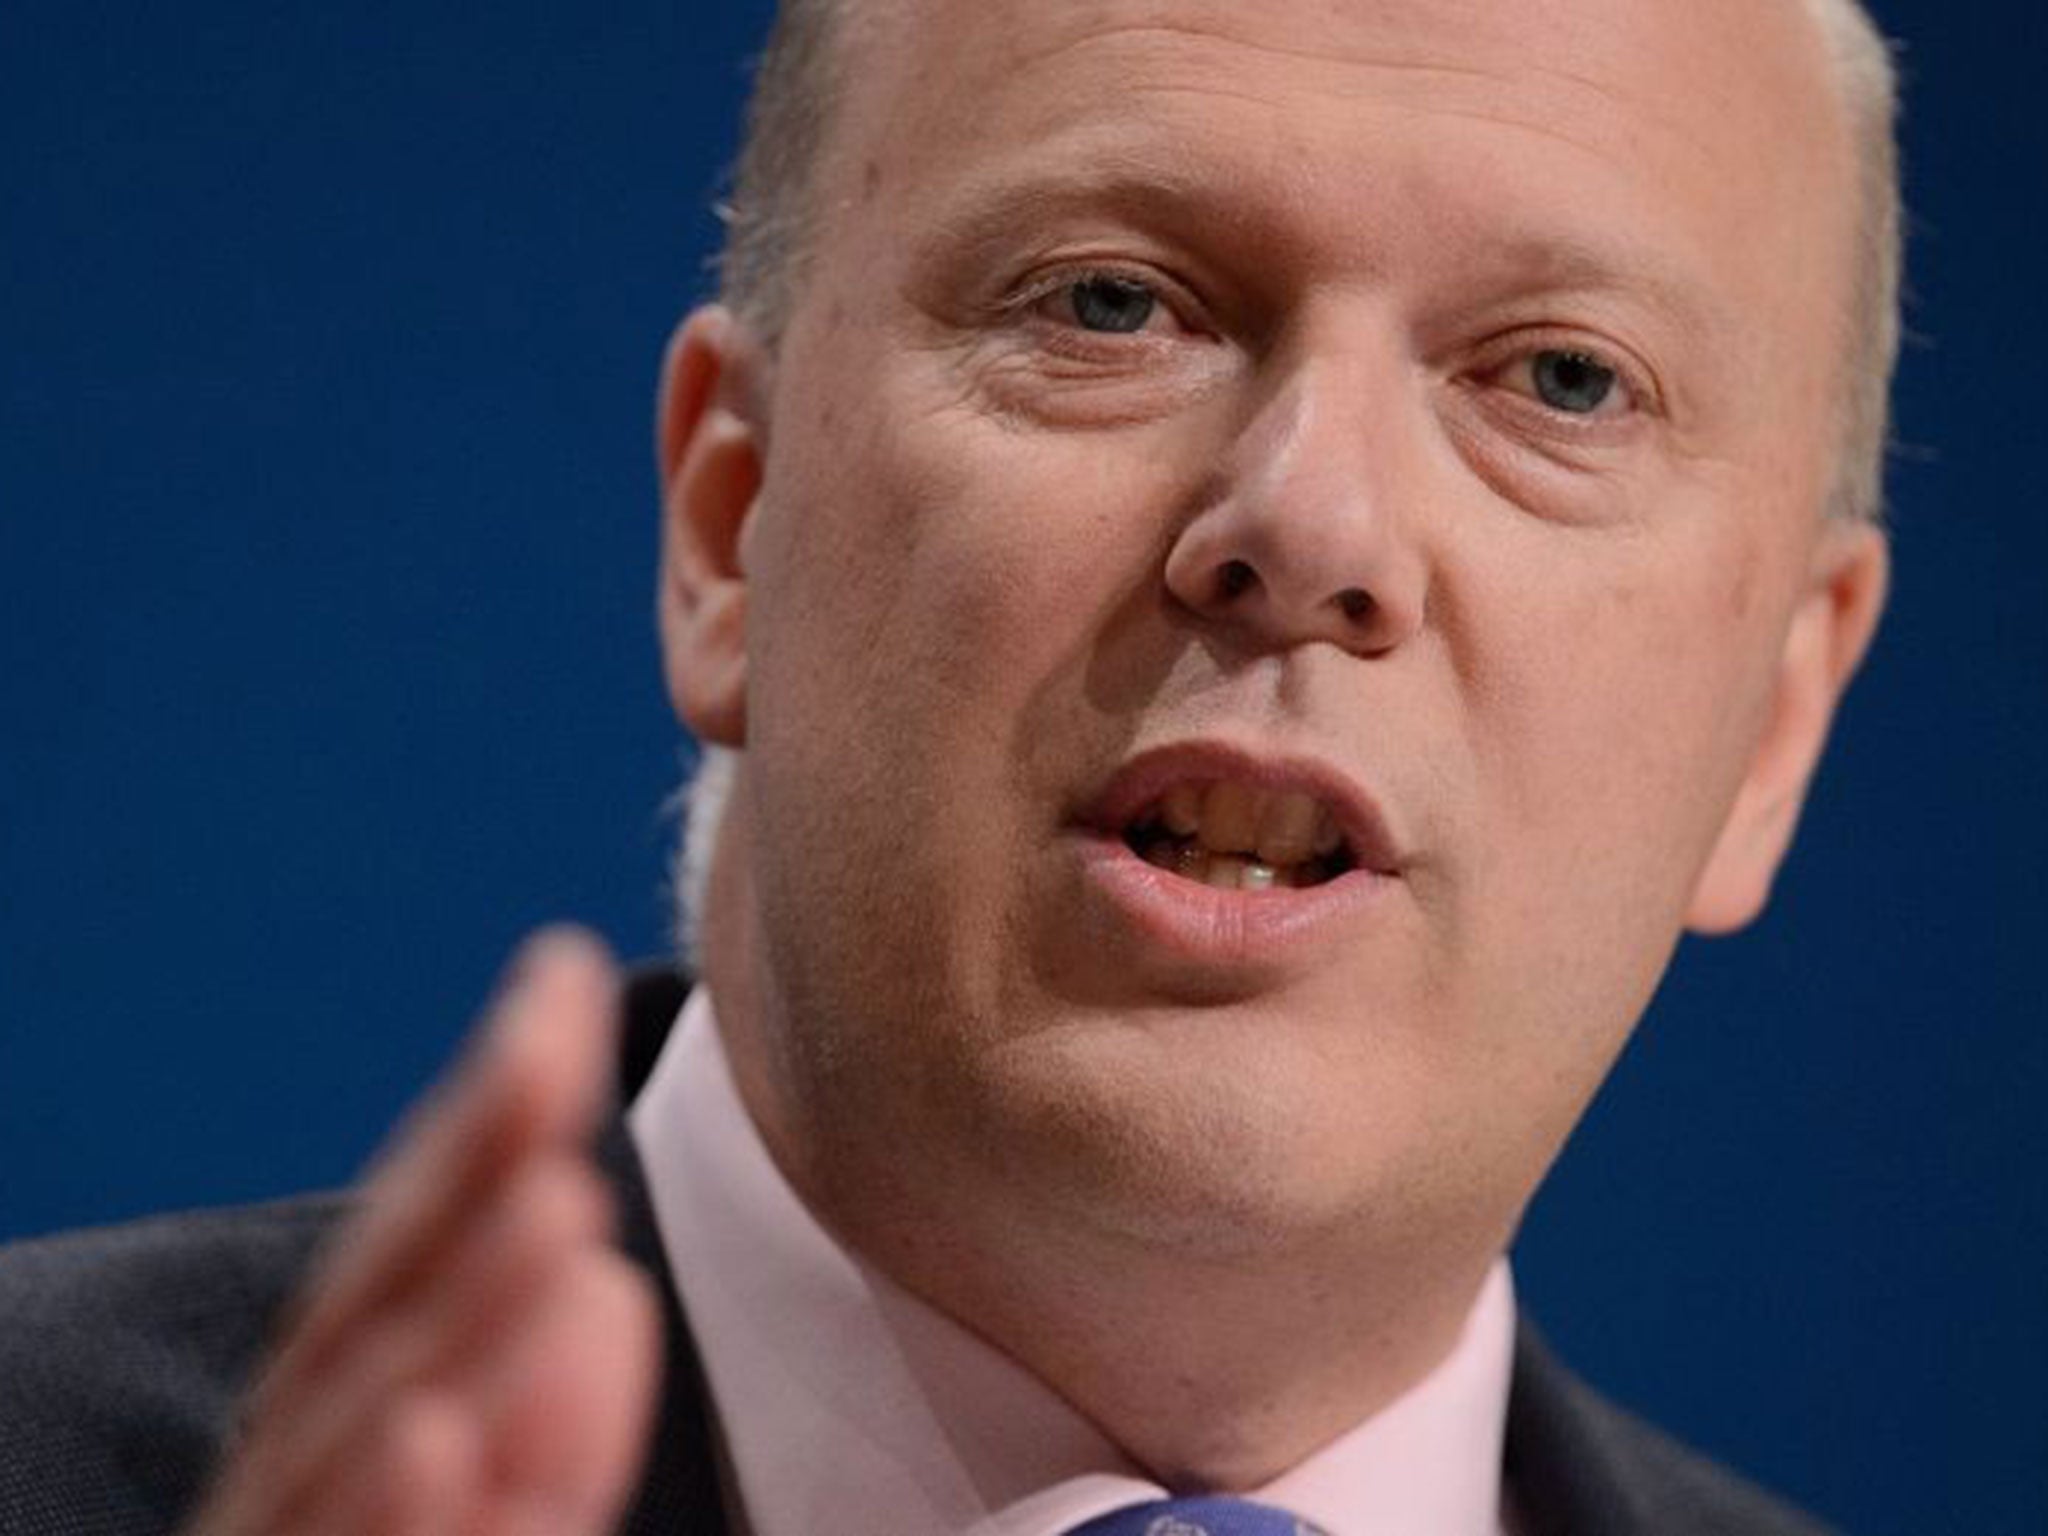 Mr Grayling refused to answer Mr Kaufman, the Father of the House, saying his comment about “racism” was demeaning. (Getty Images)